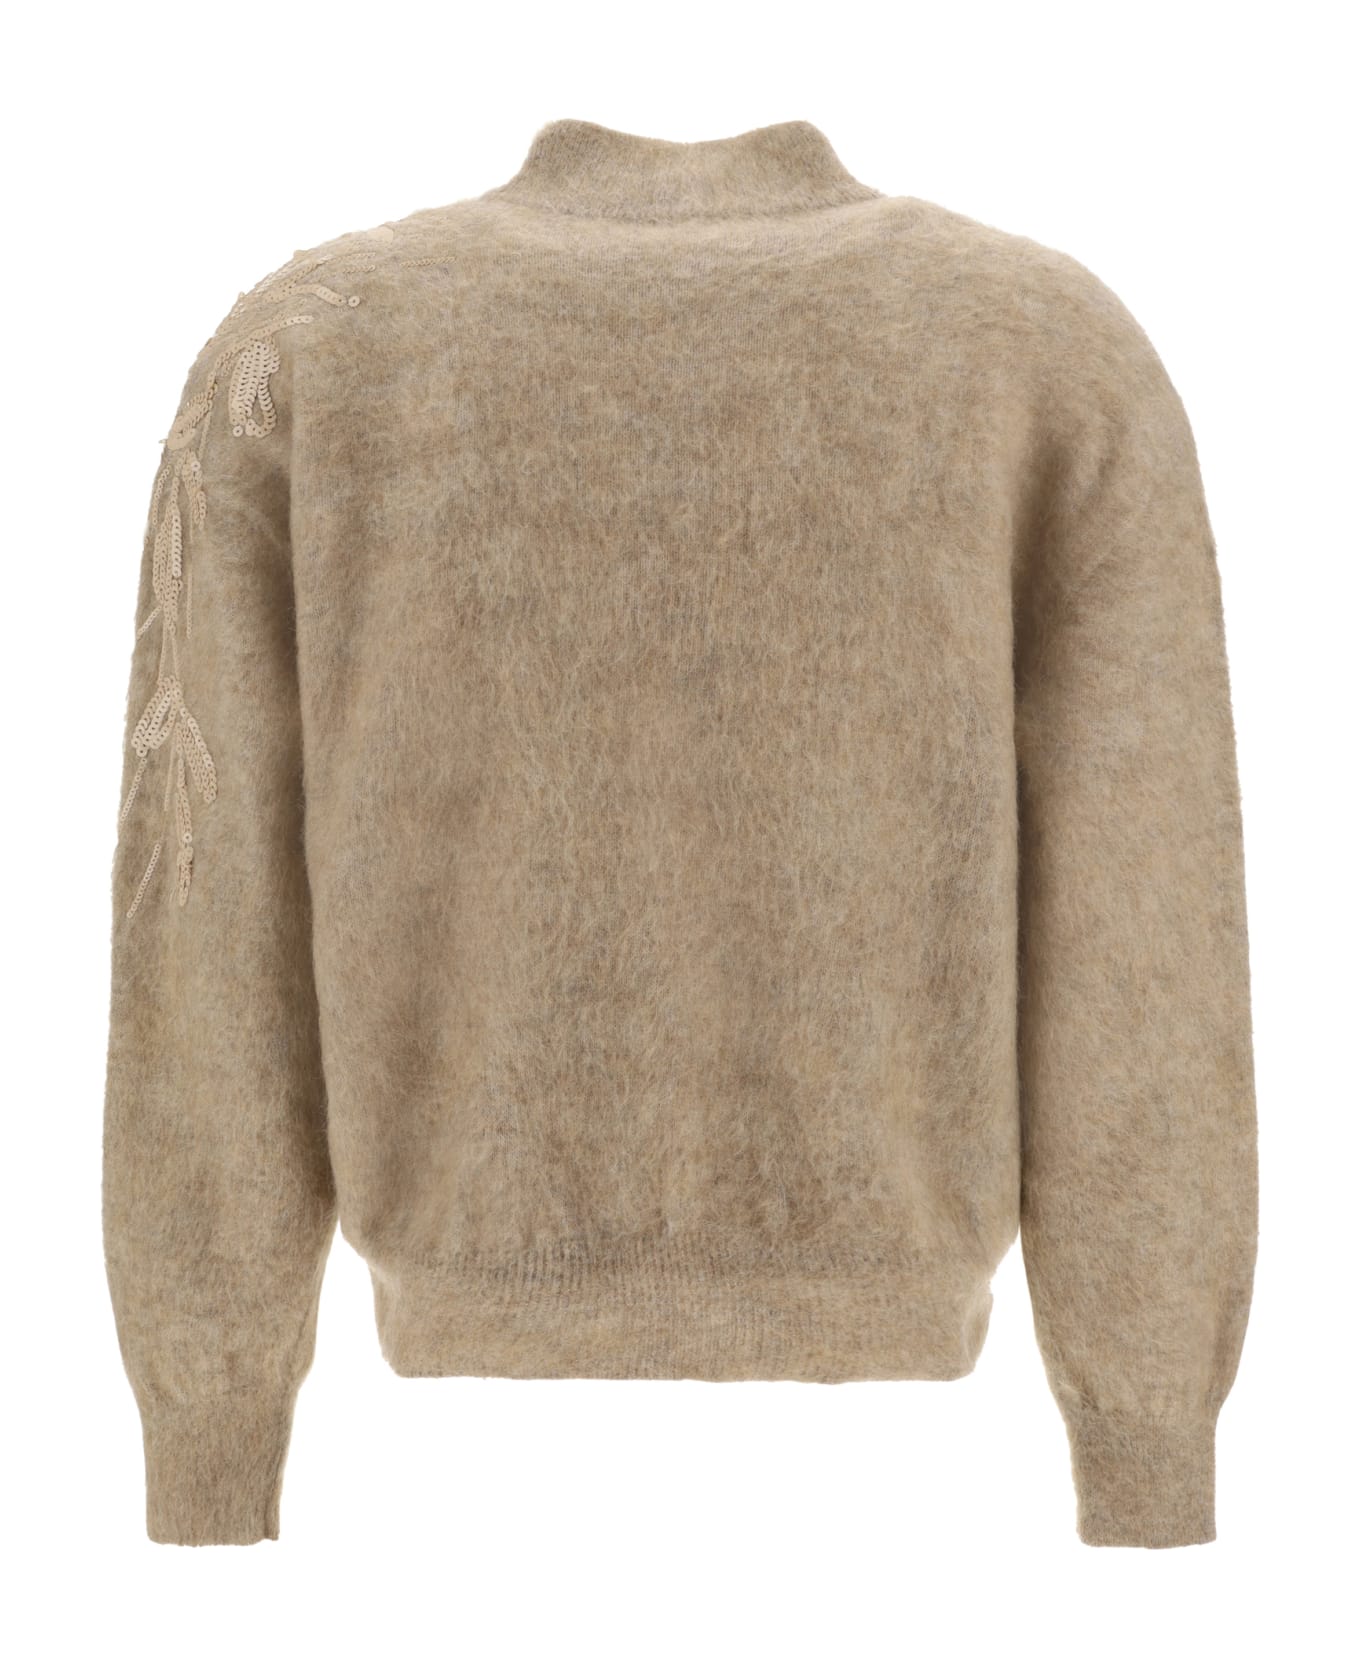 Brunello Cucinelli Long-sleeved Turtleneck Sweater With Special Sequin Appliqu? In Soft Mohair And Wool Yarn - Brown ニットウェア